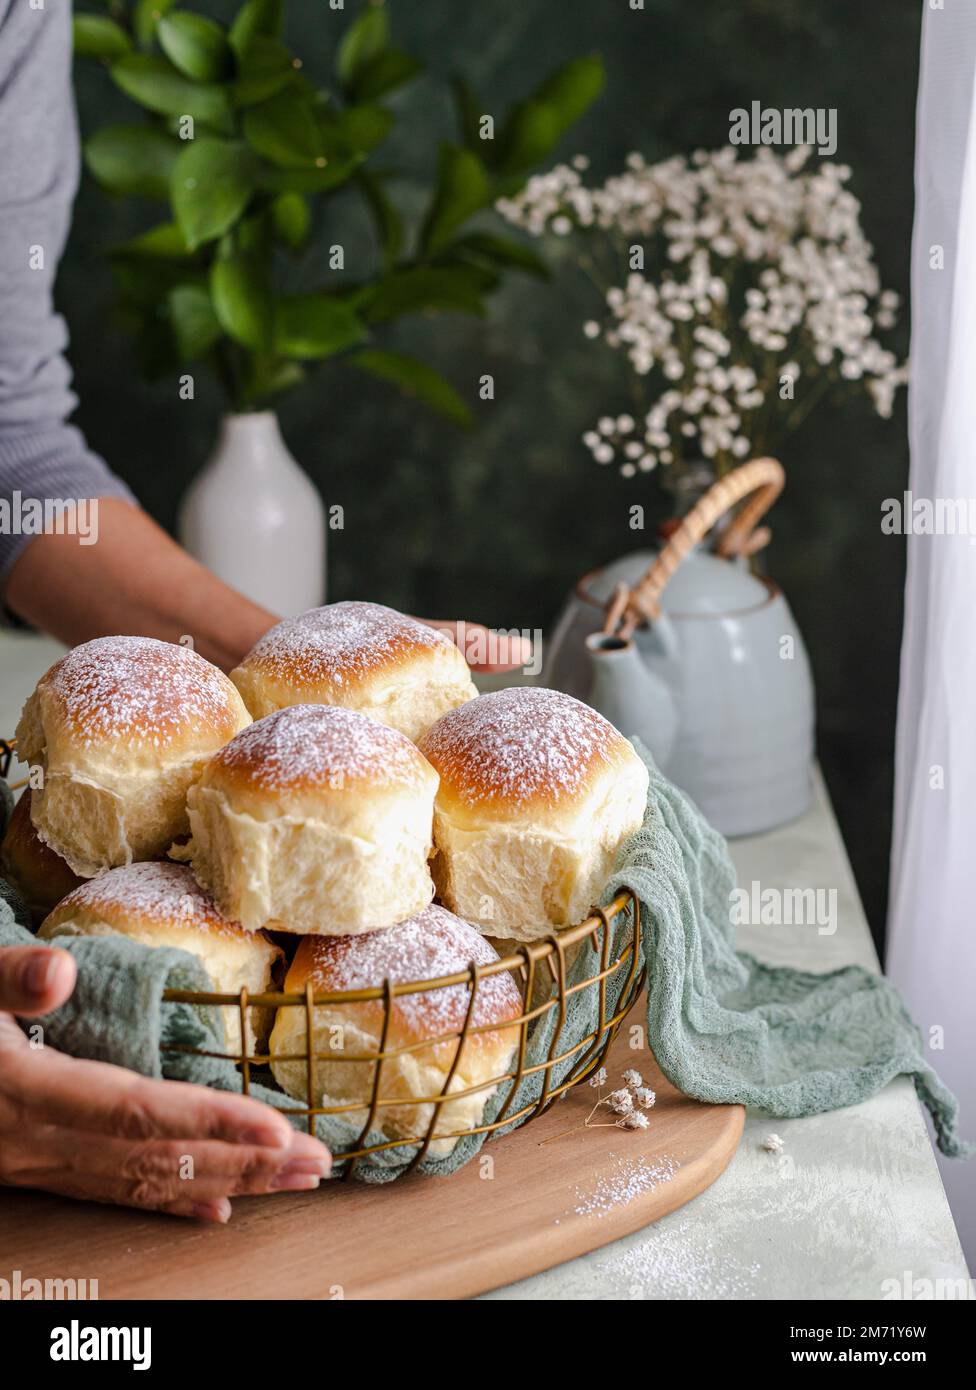 Homemade milk and creamcheese buns in a basket with a cloth next to a window Stock Photo